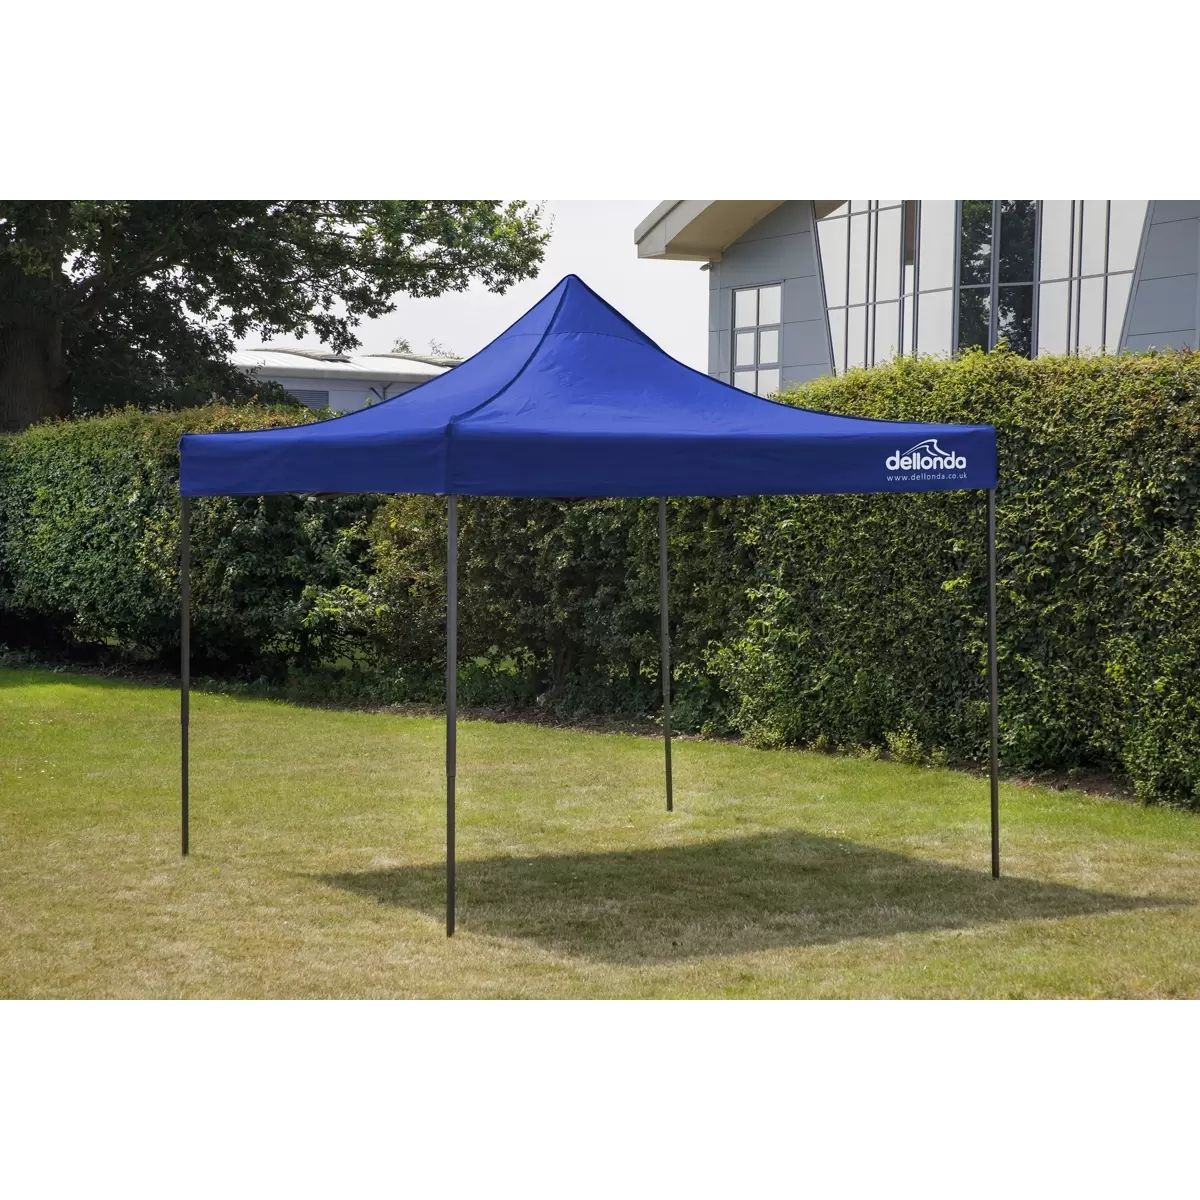 Dellonda DG127 Premium Pop-Up Gazebo Water Resistant Carry Bag Stakes Weight 2x2m